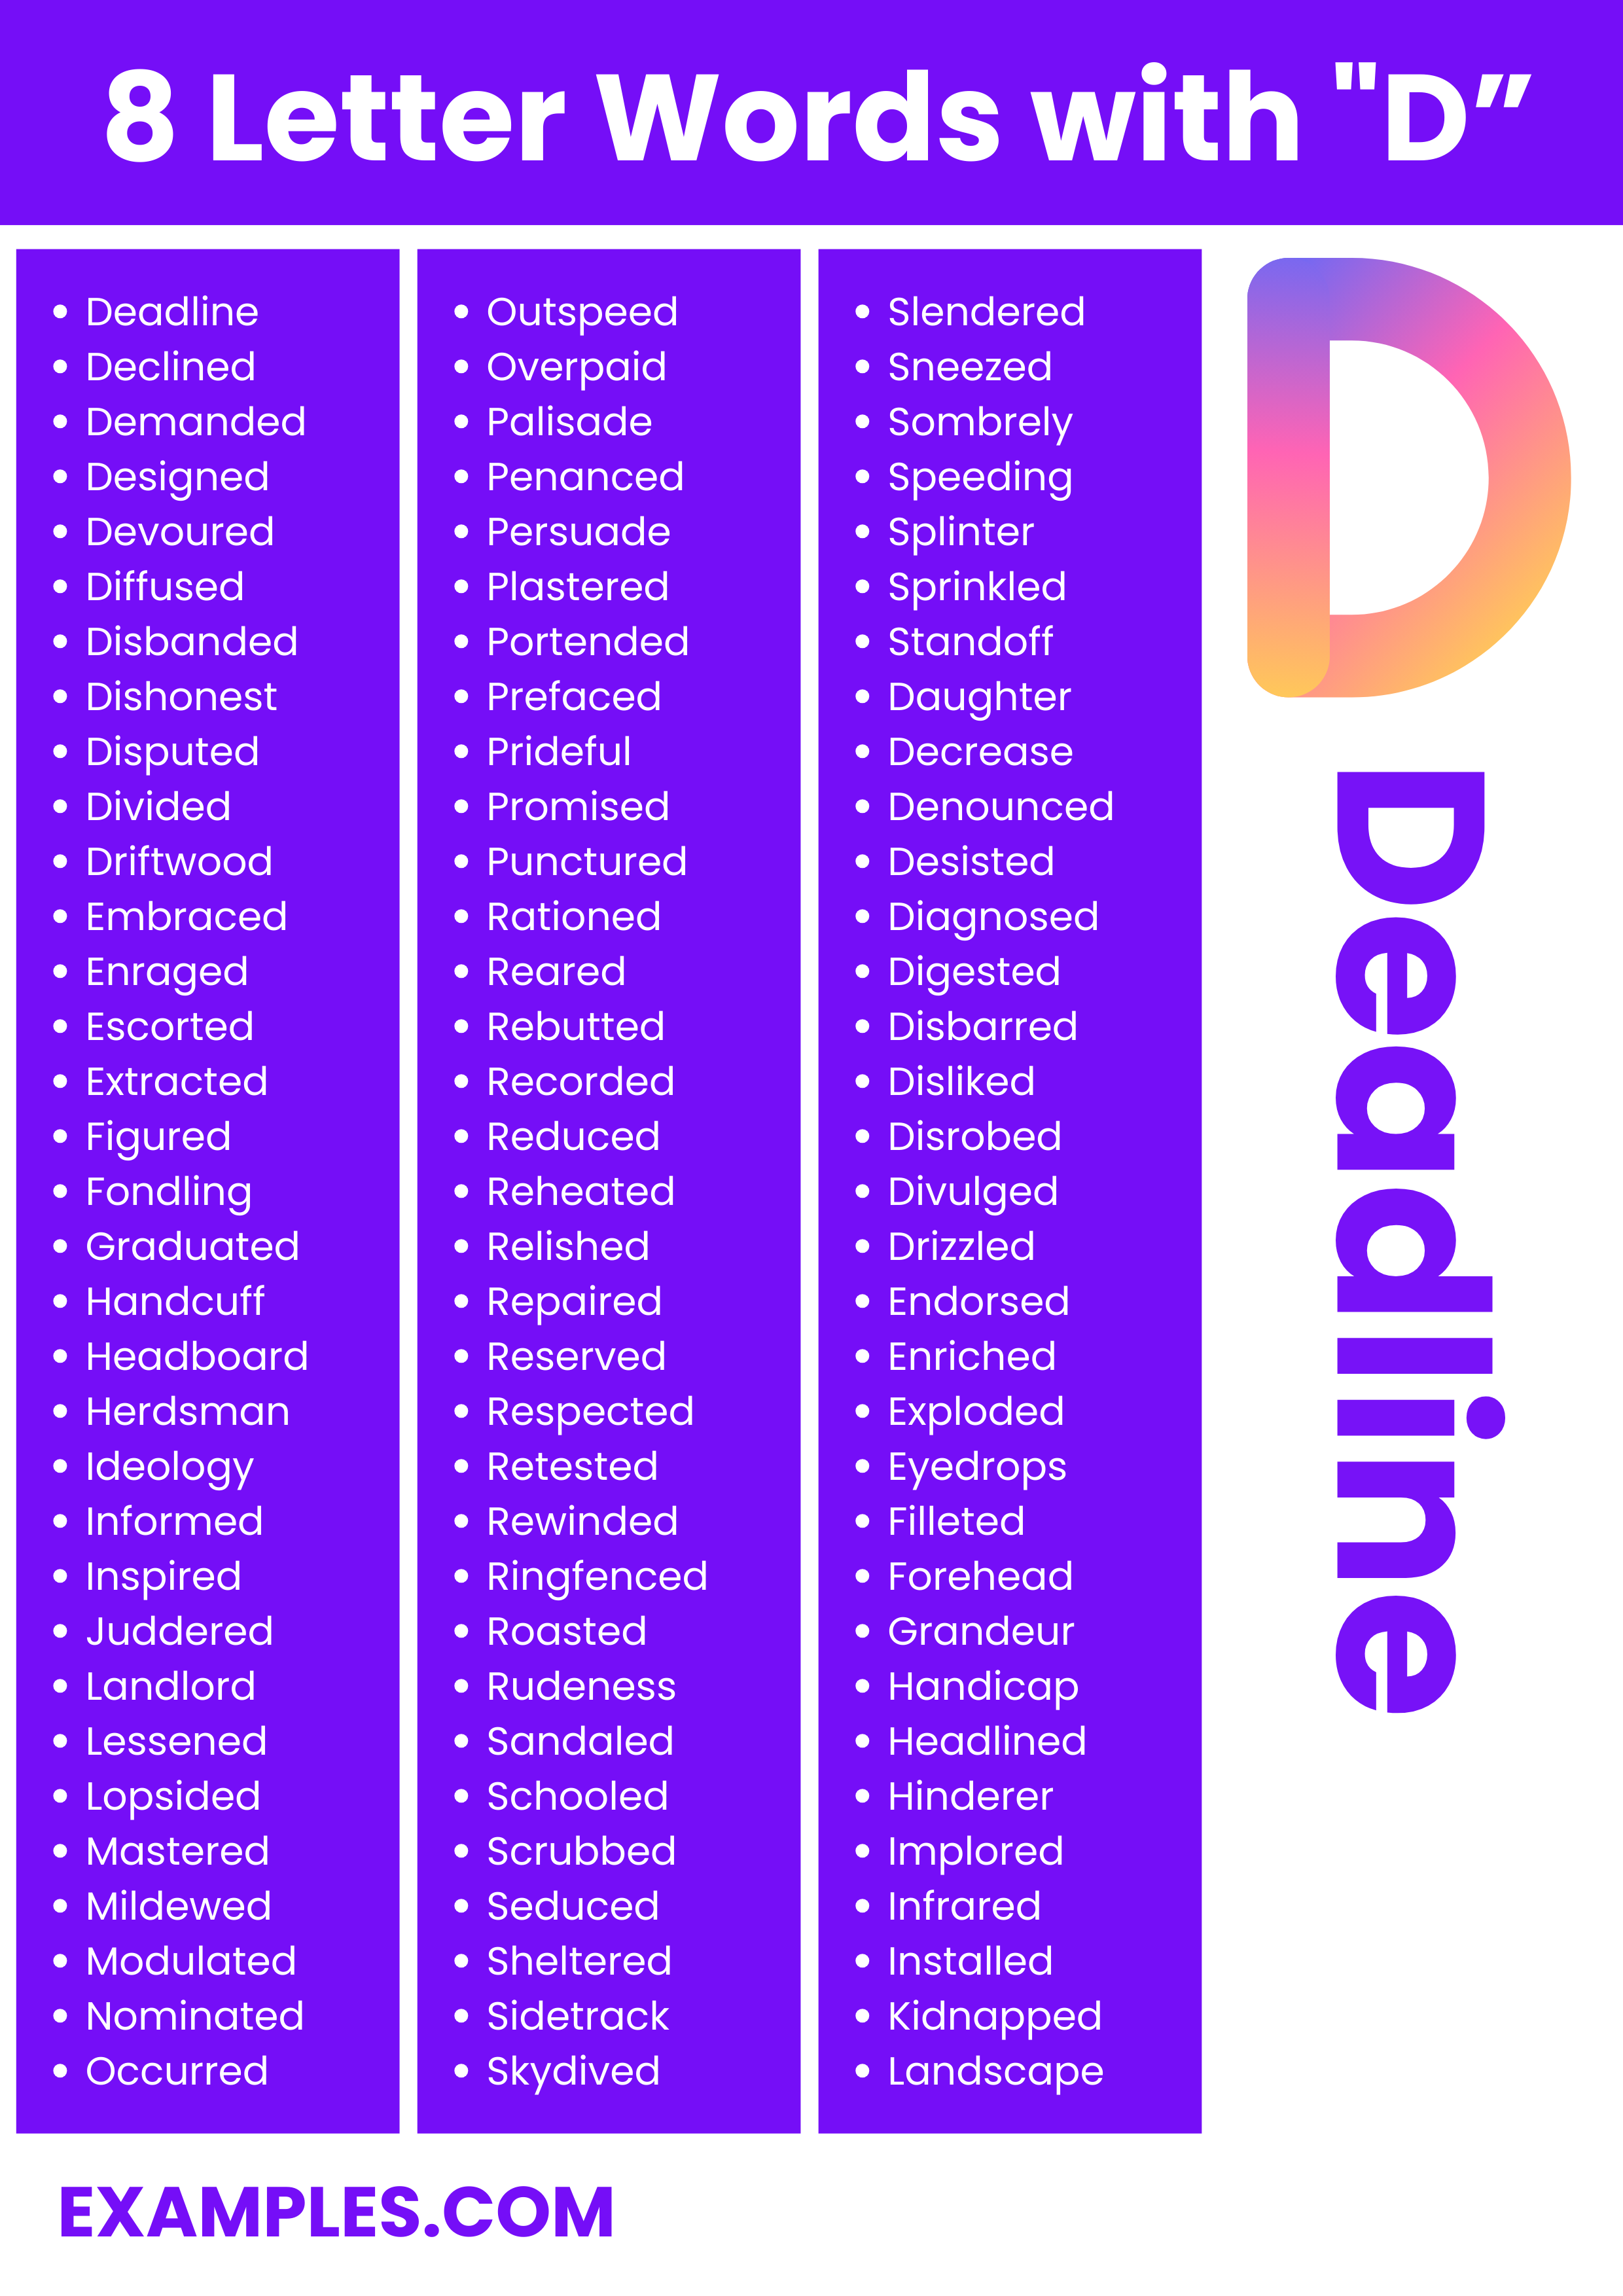 commonly used 8 letter words with d